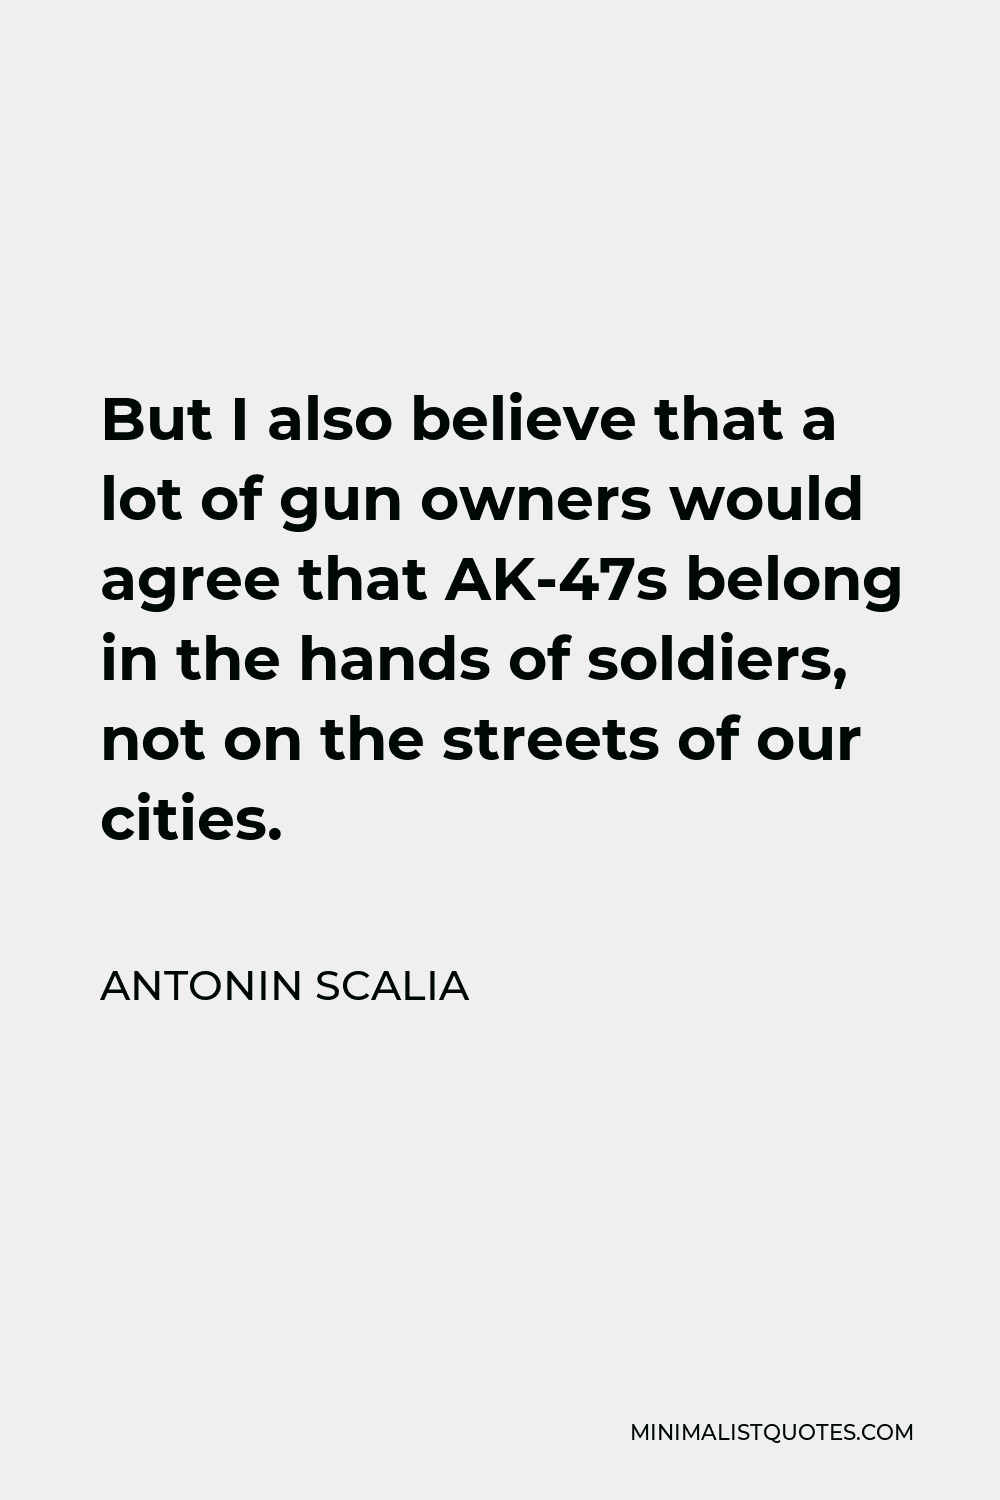 Antonin Scalia Quote - But I also believe that a lot of gun owners would agree that AK-47s belong in the hands of soldiers, not on the streets of our cities.